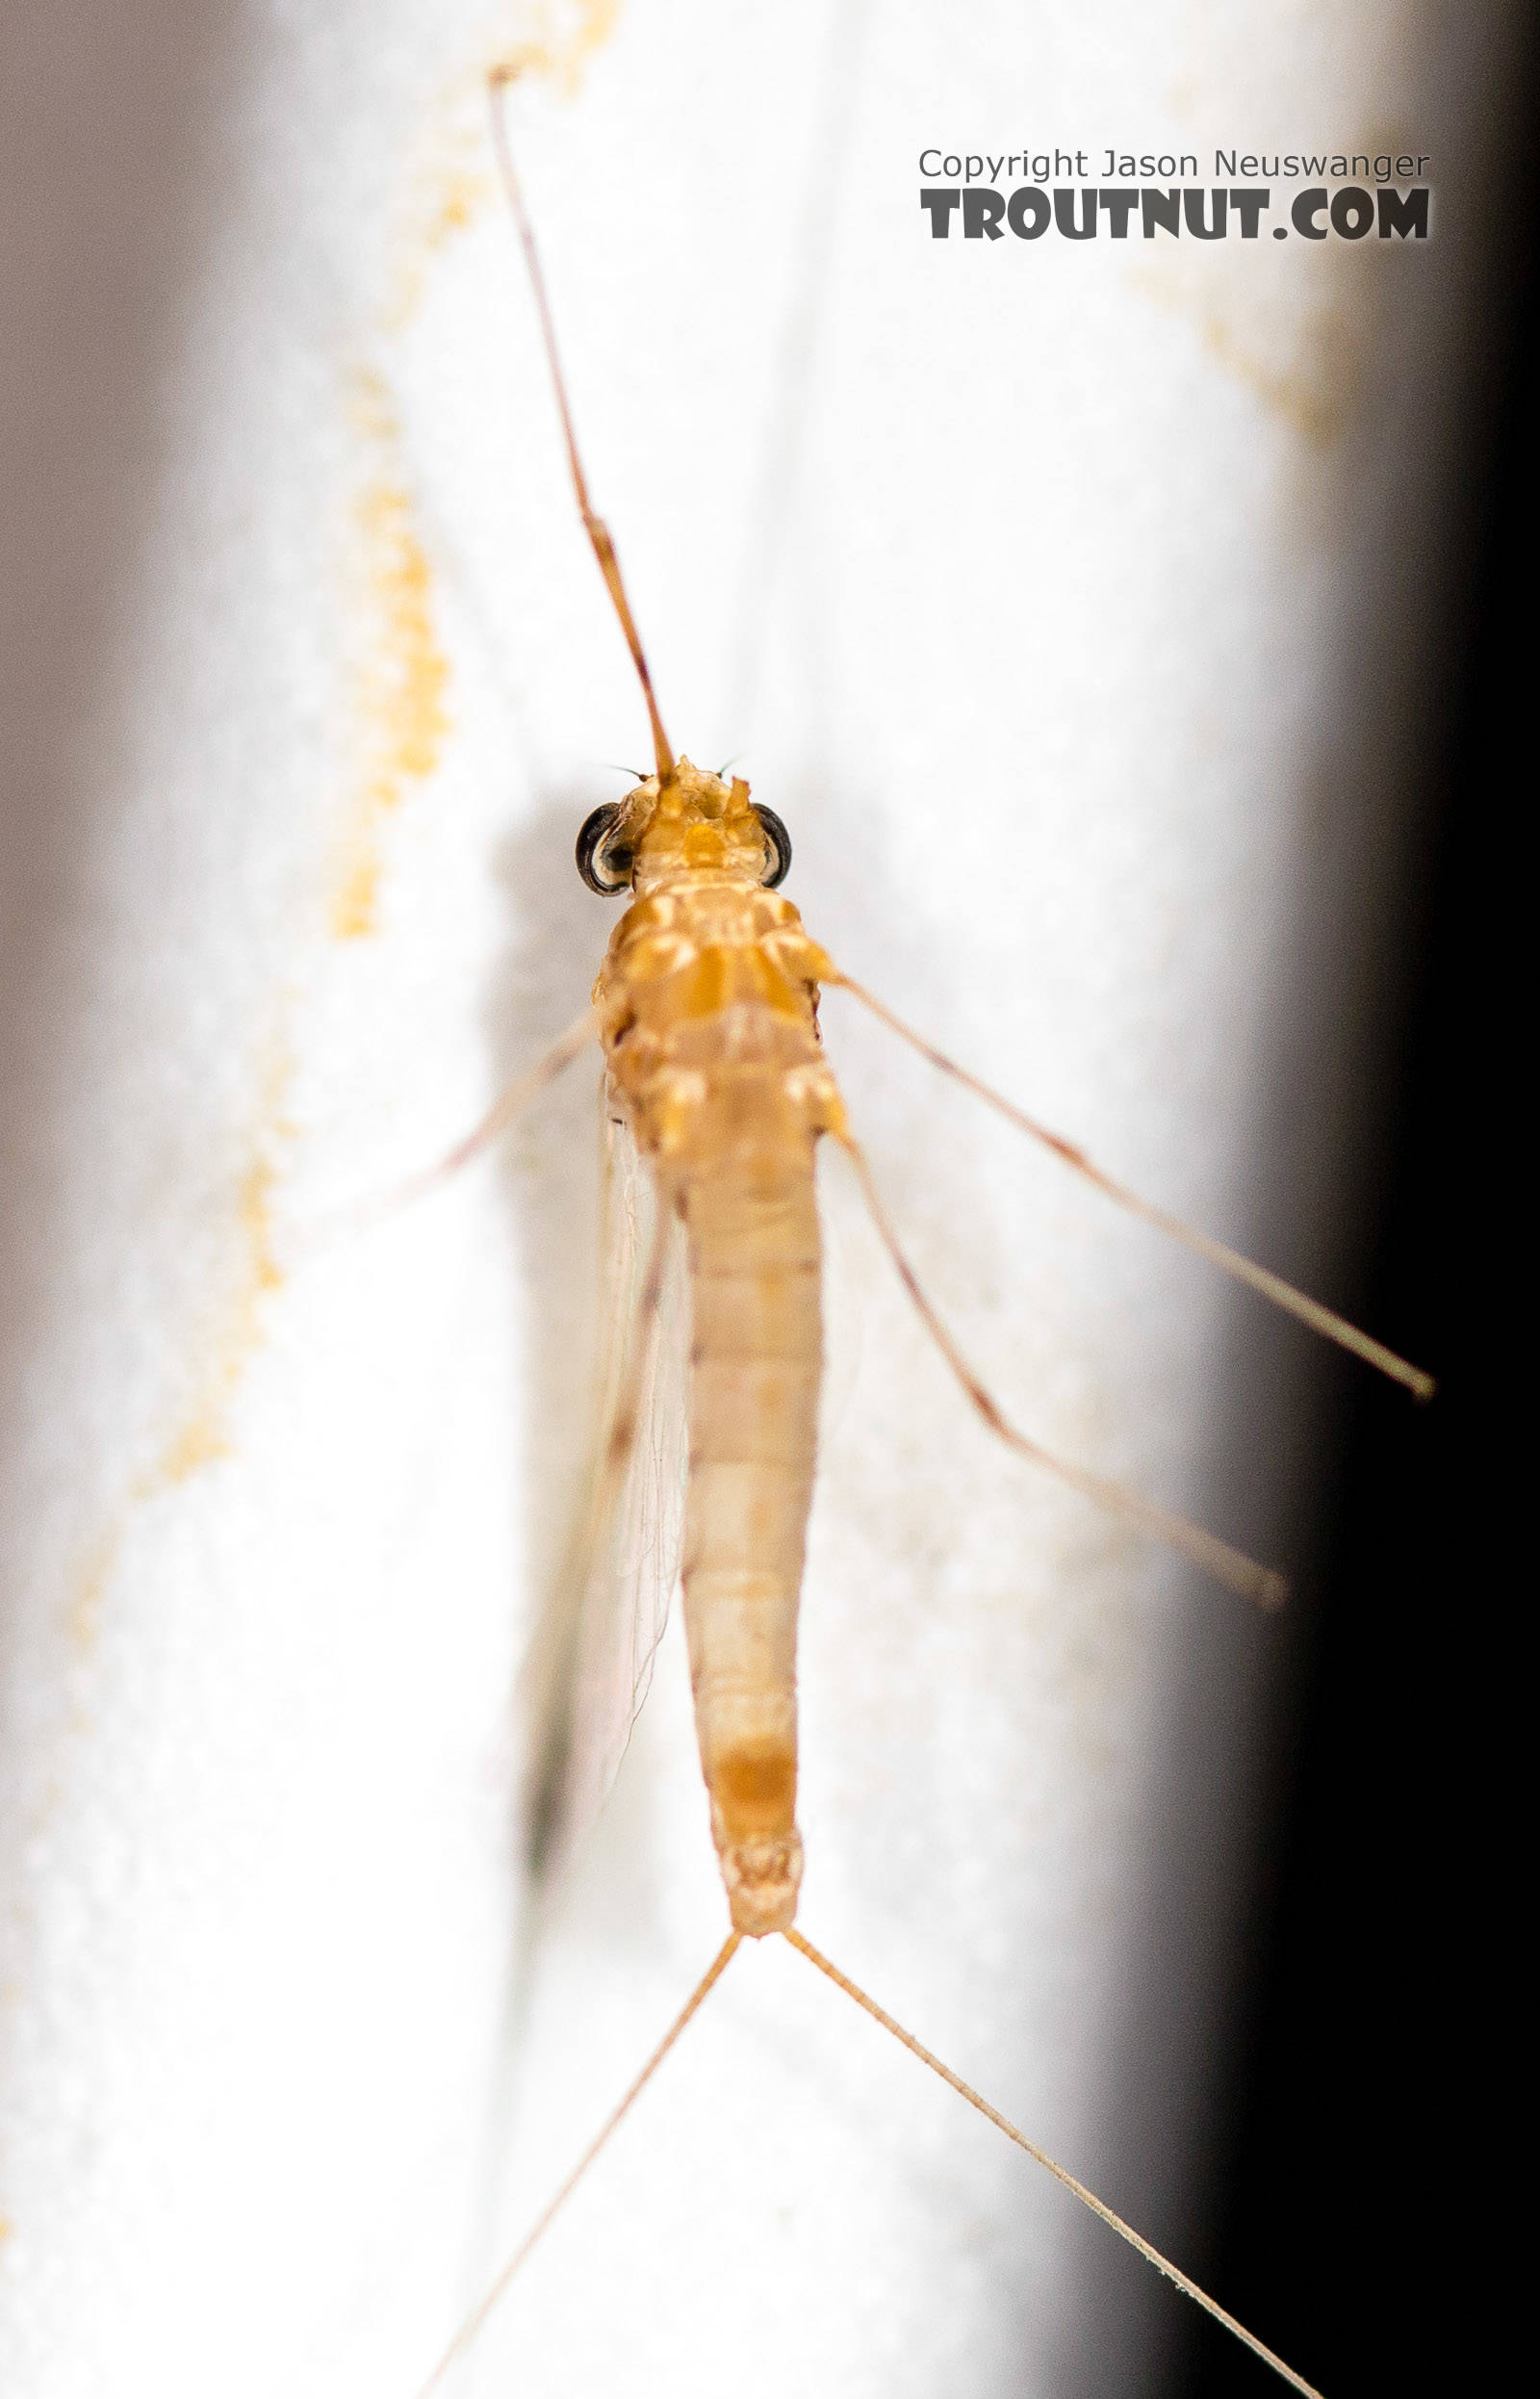 Female Epeorus albertae (Pink Lady) Mayfly Spinner from the North Fork Stillaguamish River in Washington